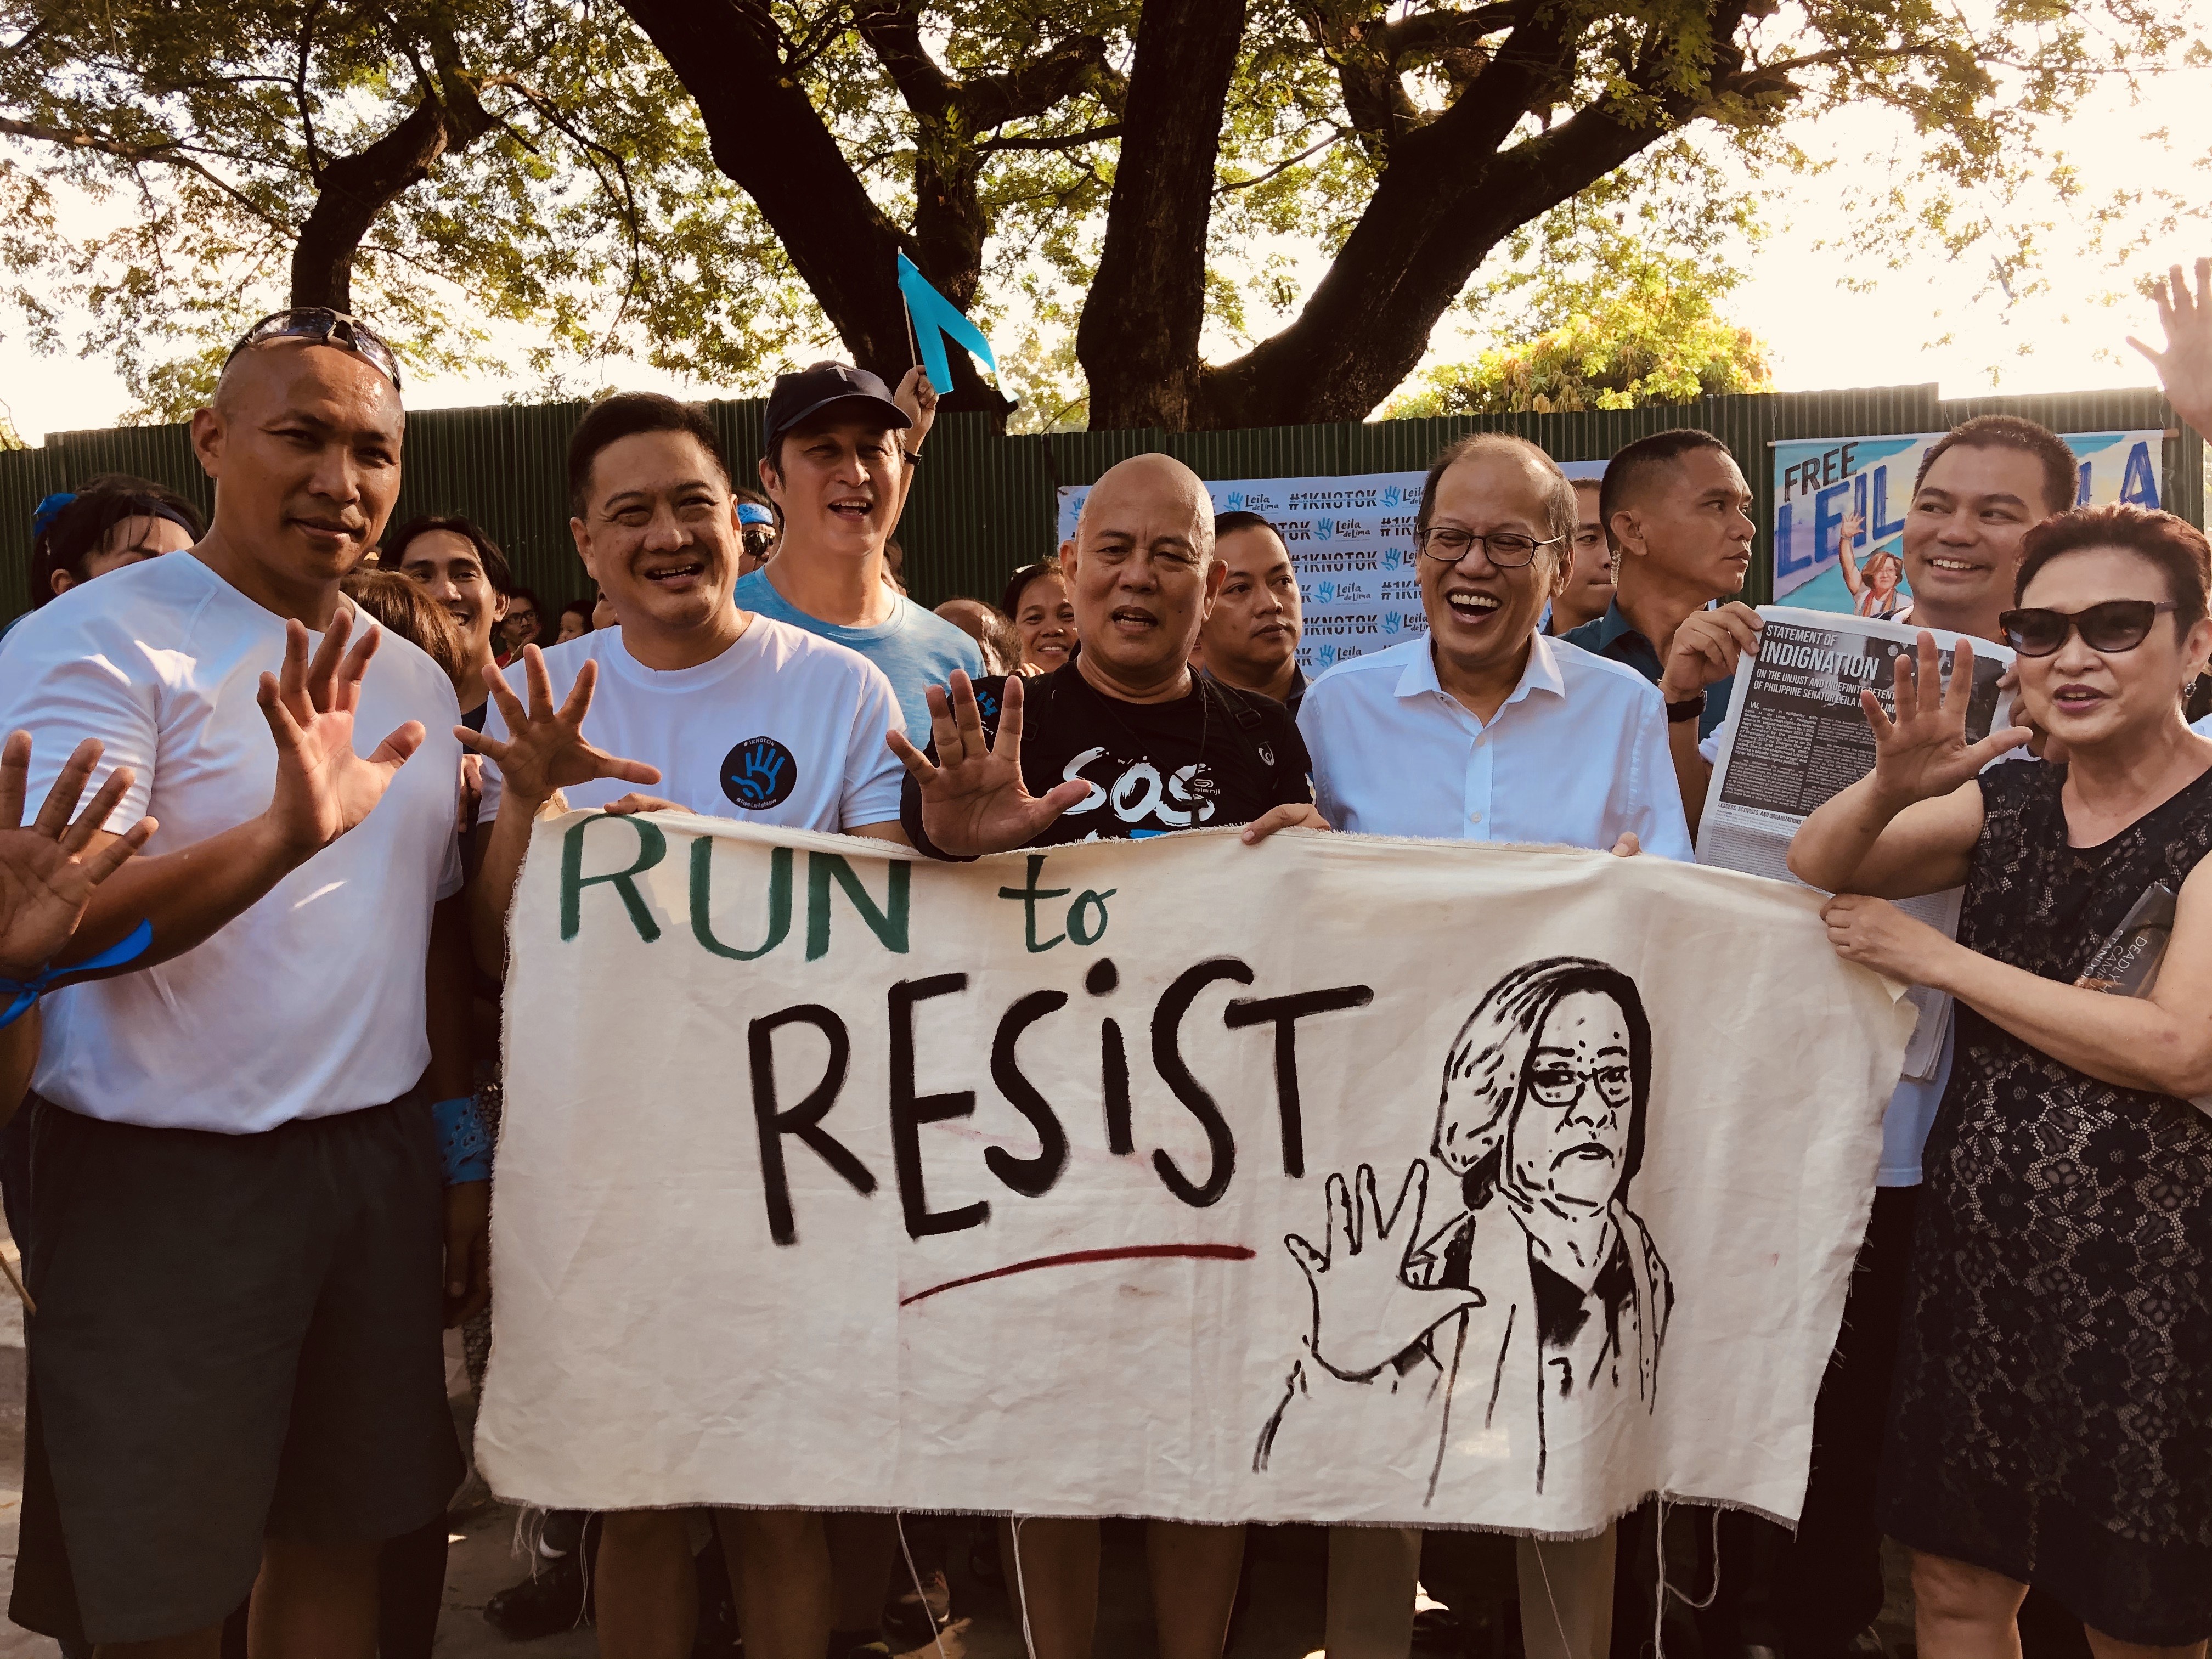 'RUN TO RESIST.' Ex-president Bengino Aquino III (3rd from right) joins Senator Leila de Lima's supporters in calling for her release from jail. Photo by Mara Cepeda/Rappler  